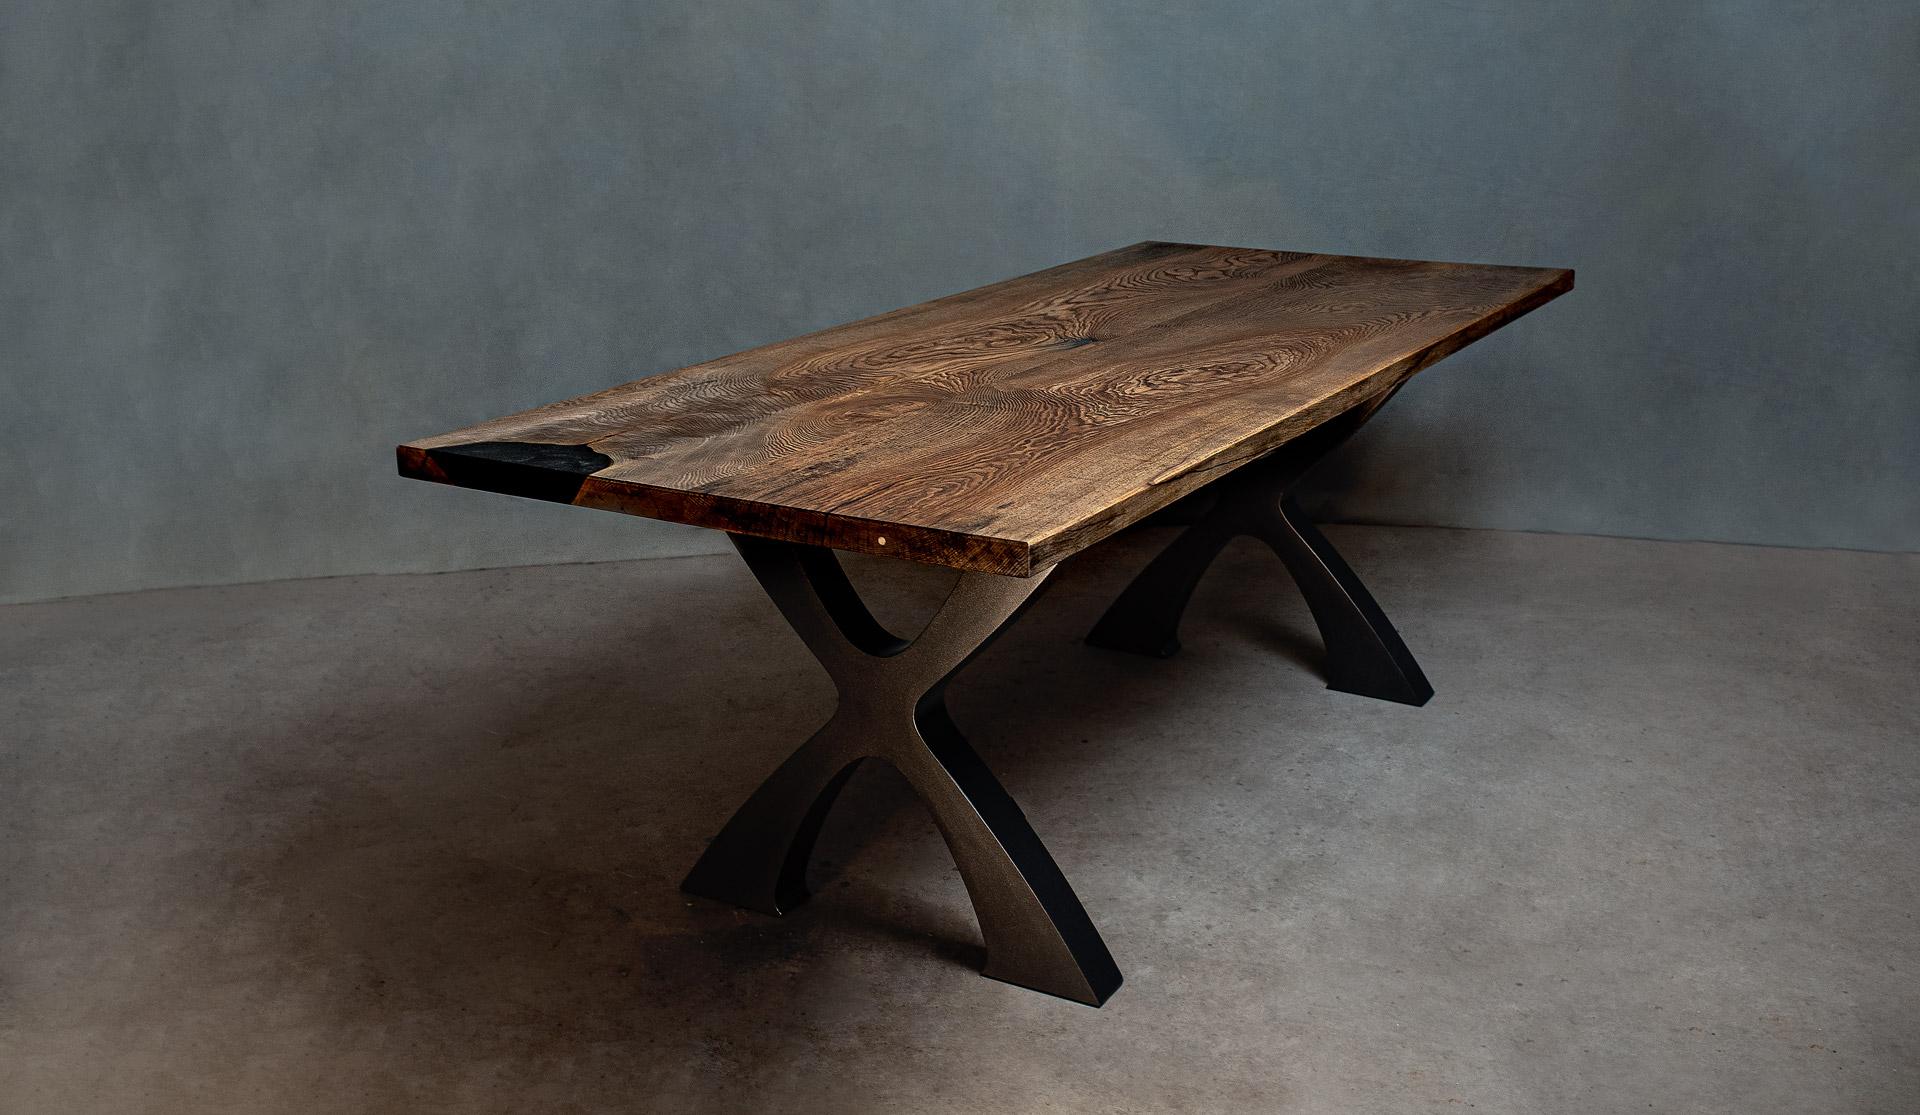 A 6-seater black oak dining table with modern X-shaped table legs. 
The leg finish is a durable powder coat.

Normally a native American tree, this black oak was found in western Sweden.

The table is available immediately.